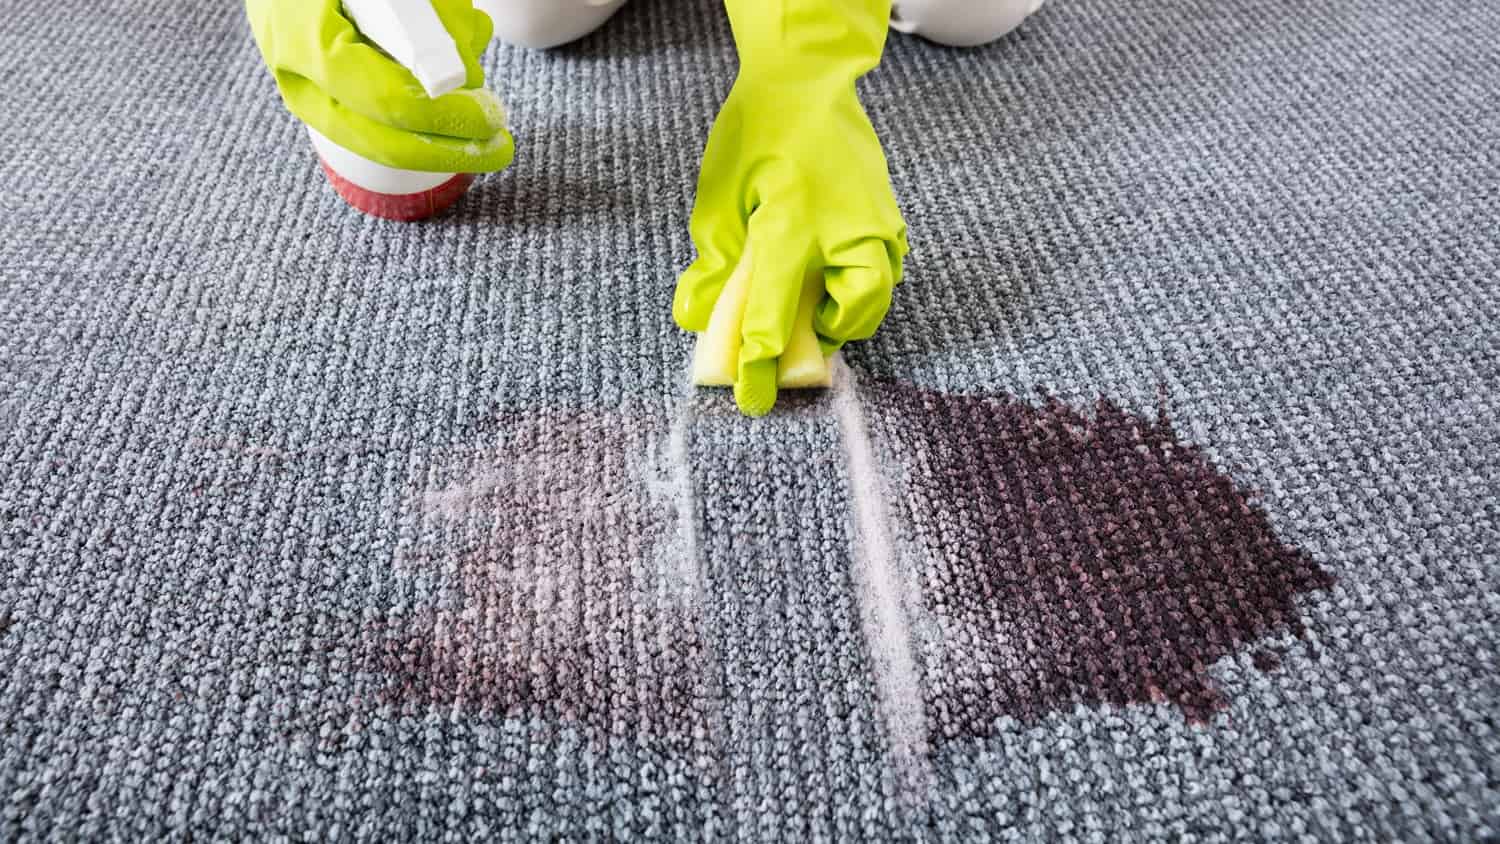 A close-up image of a hand holding a cloth and removing a stubborn stain from a carpet.